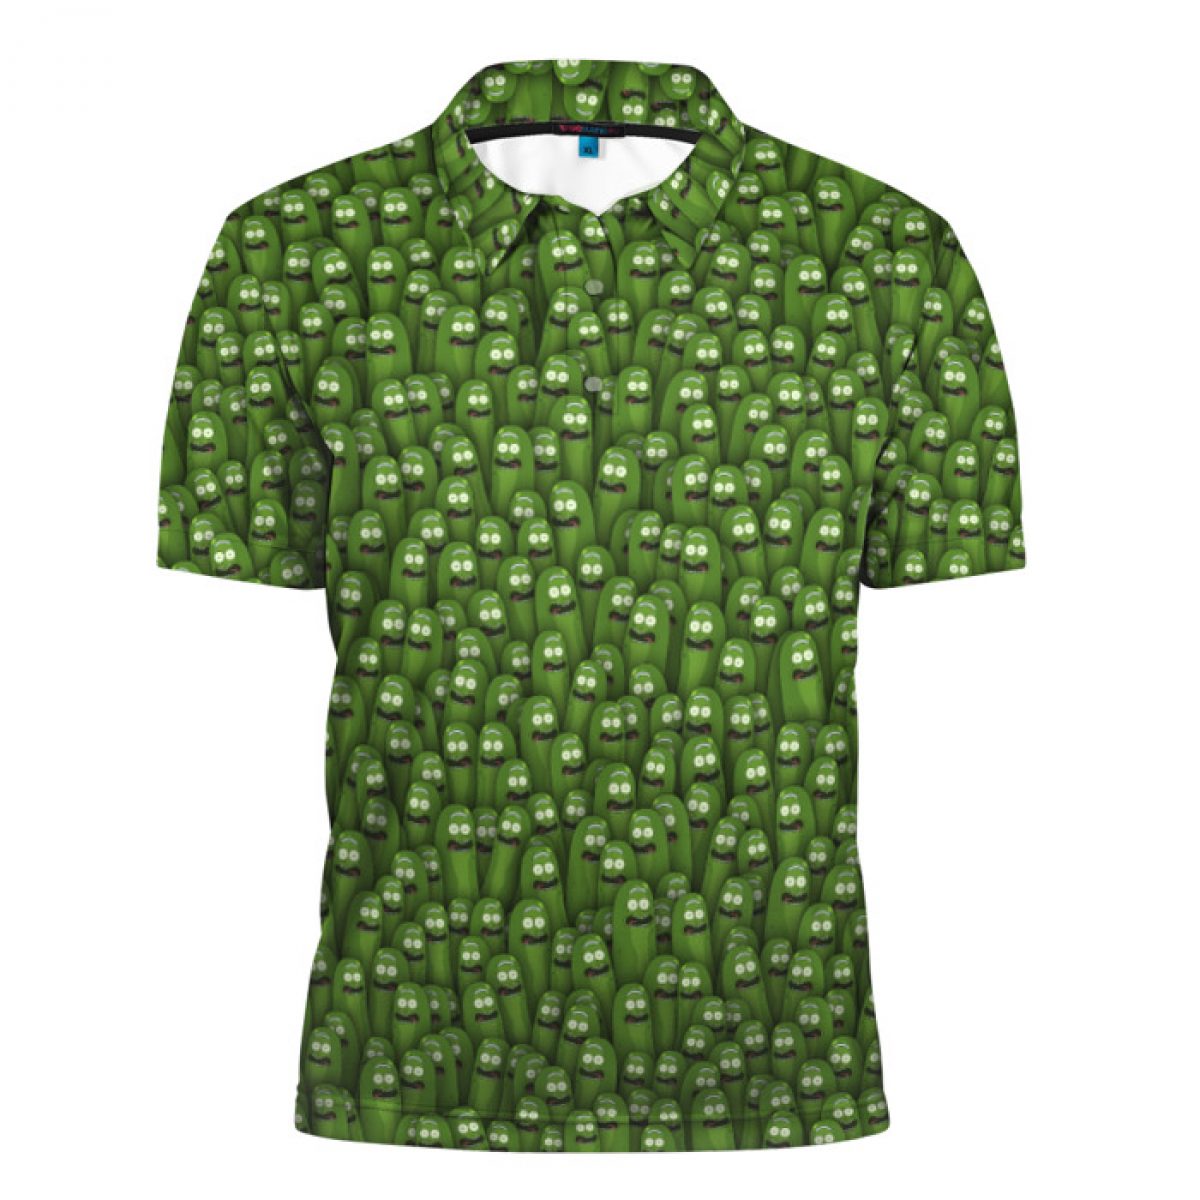 Buy Polo Shirt Pickles Rick And Morty Merch Props - IdolStore